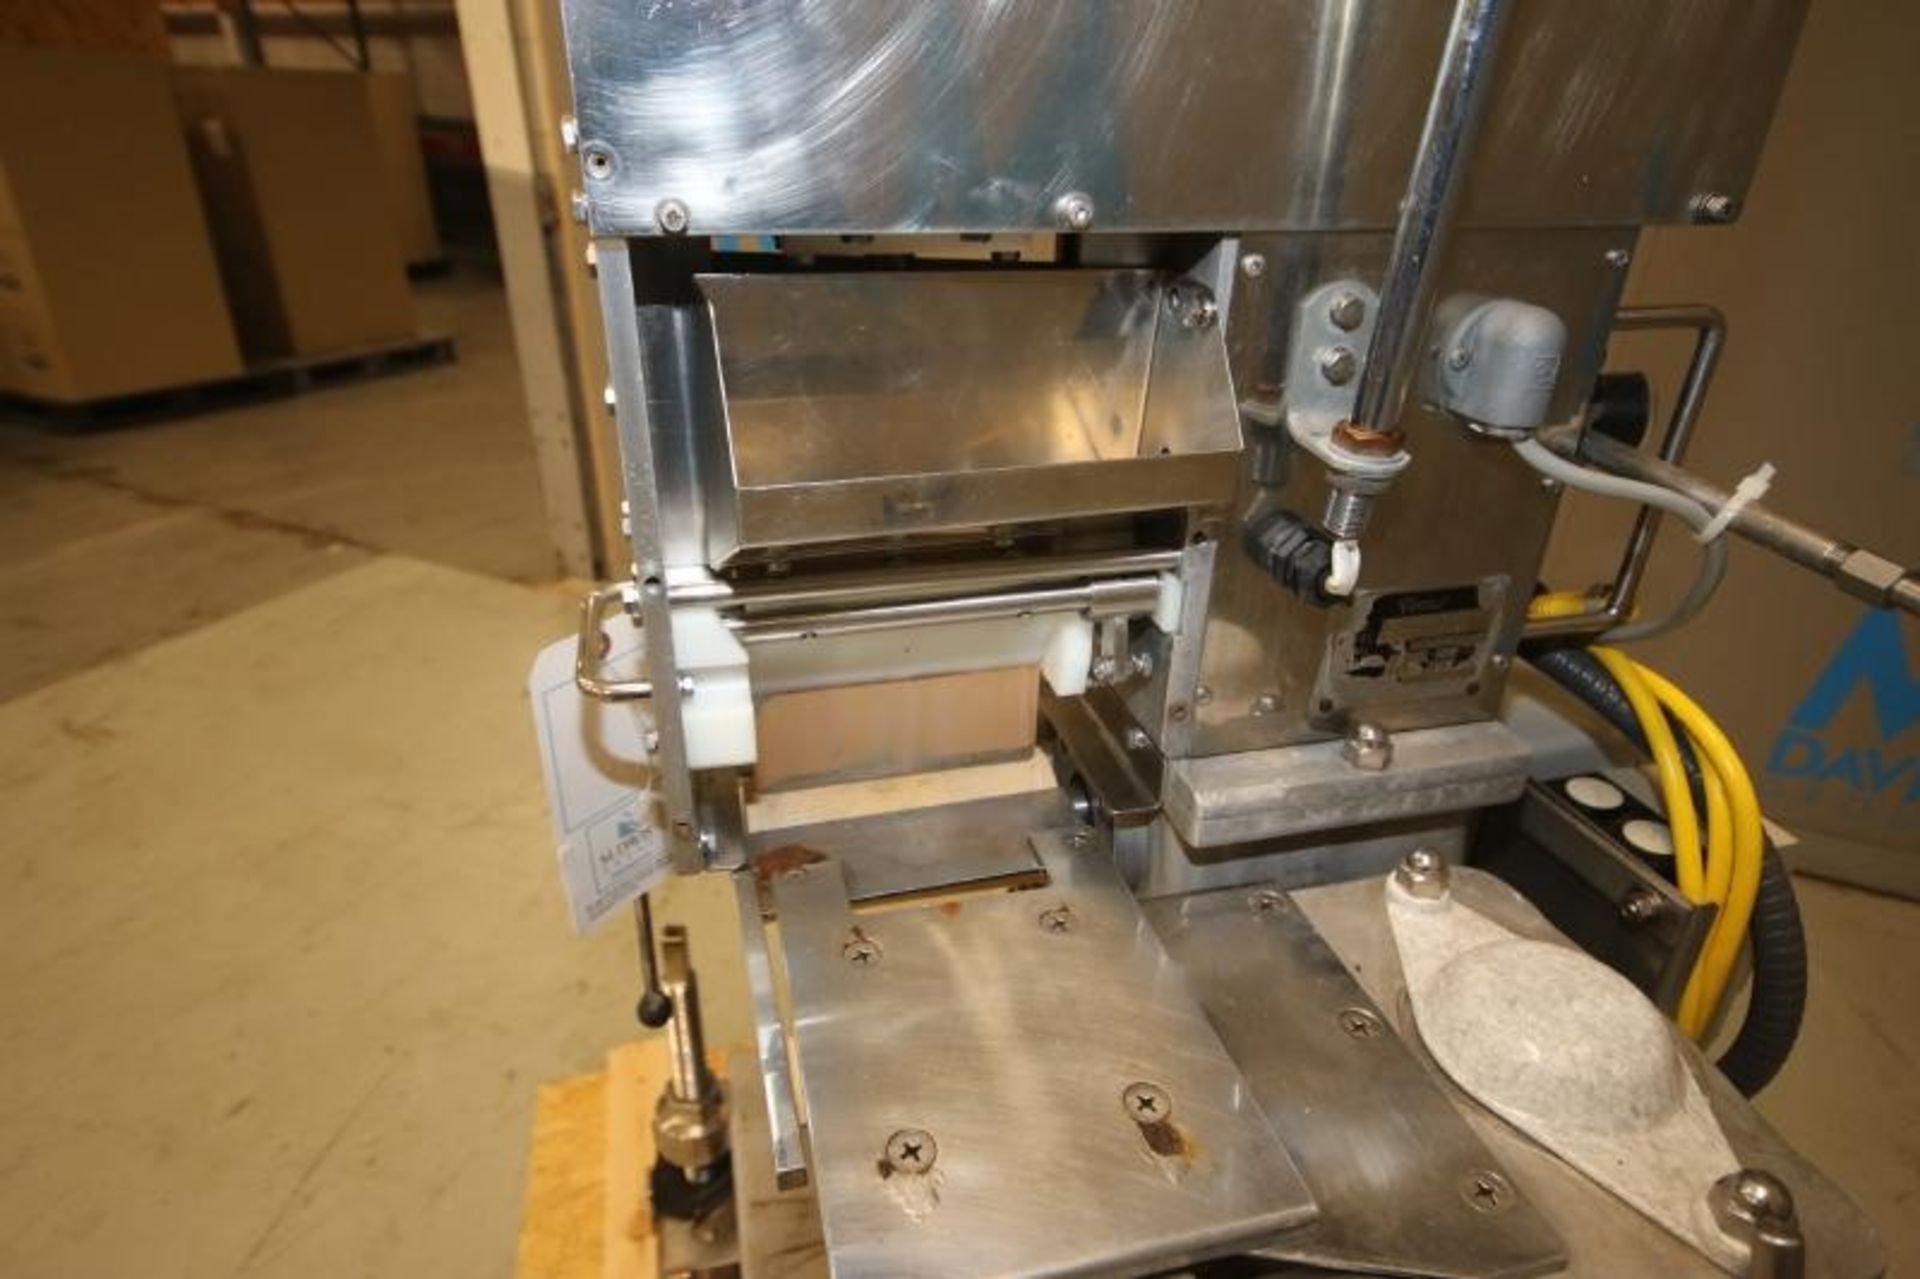 Rheon S/S Guillotine Style Vertical Cross Cutter, Model GK420, SN396, with 5.5 " Length Knife, - Image 6 of 8